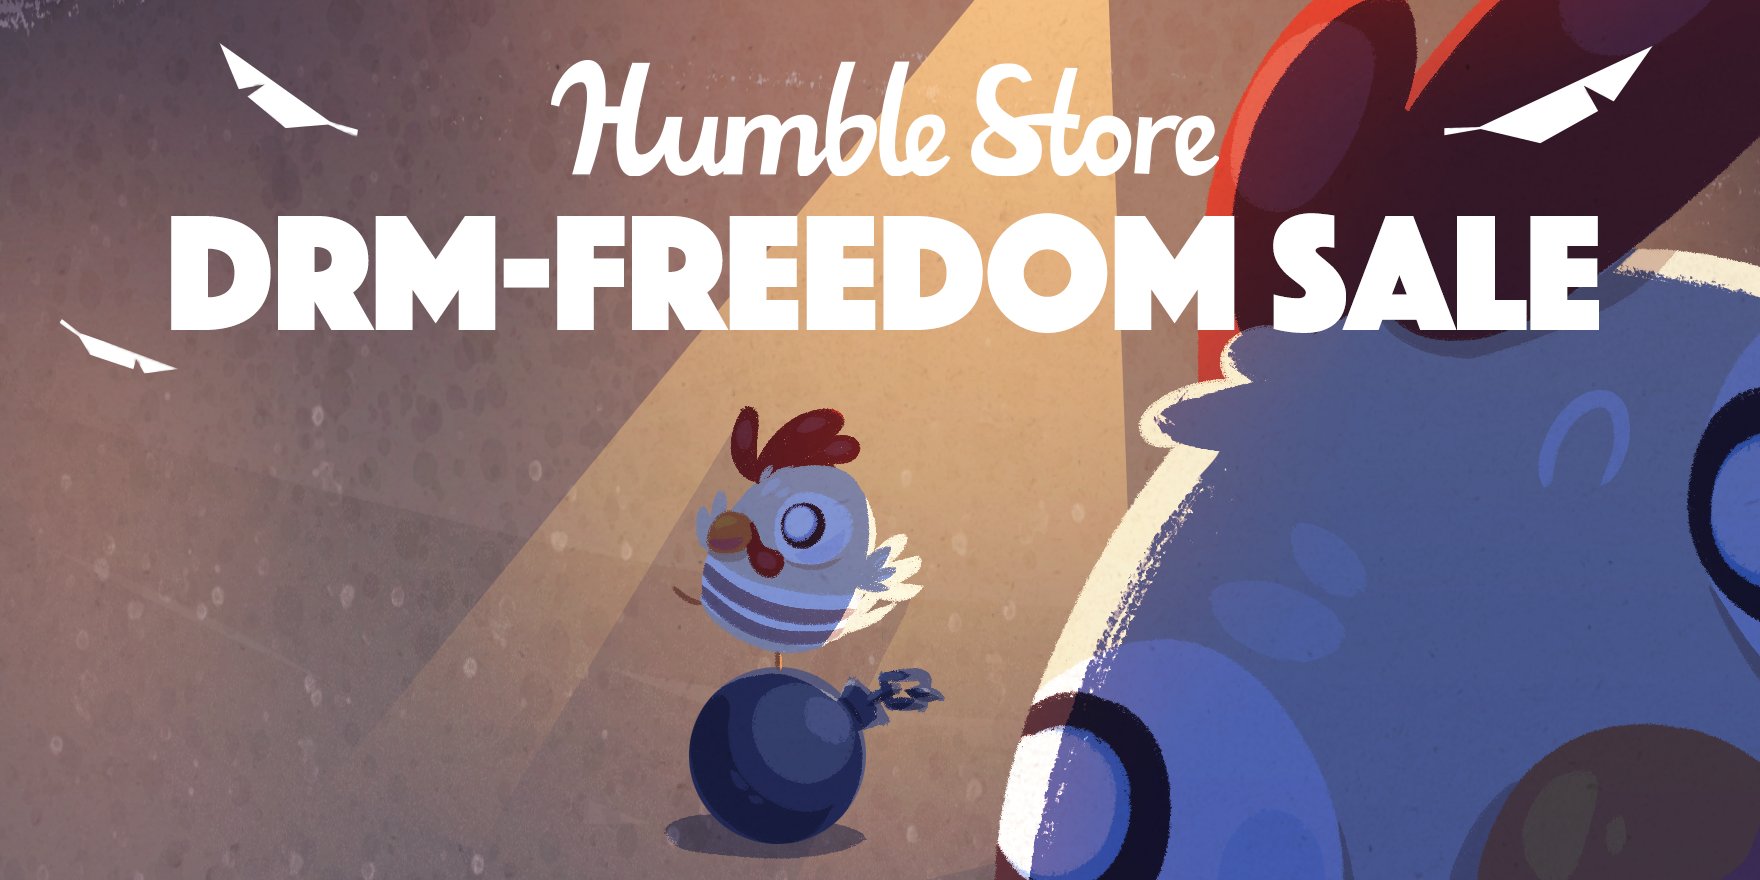 The Humble Store's DRM-Freedom Sale is live